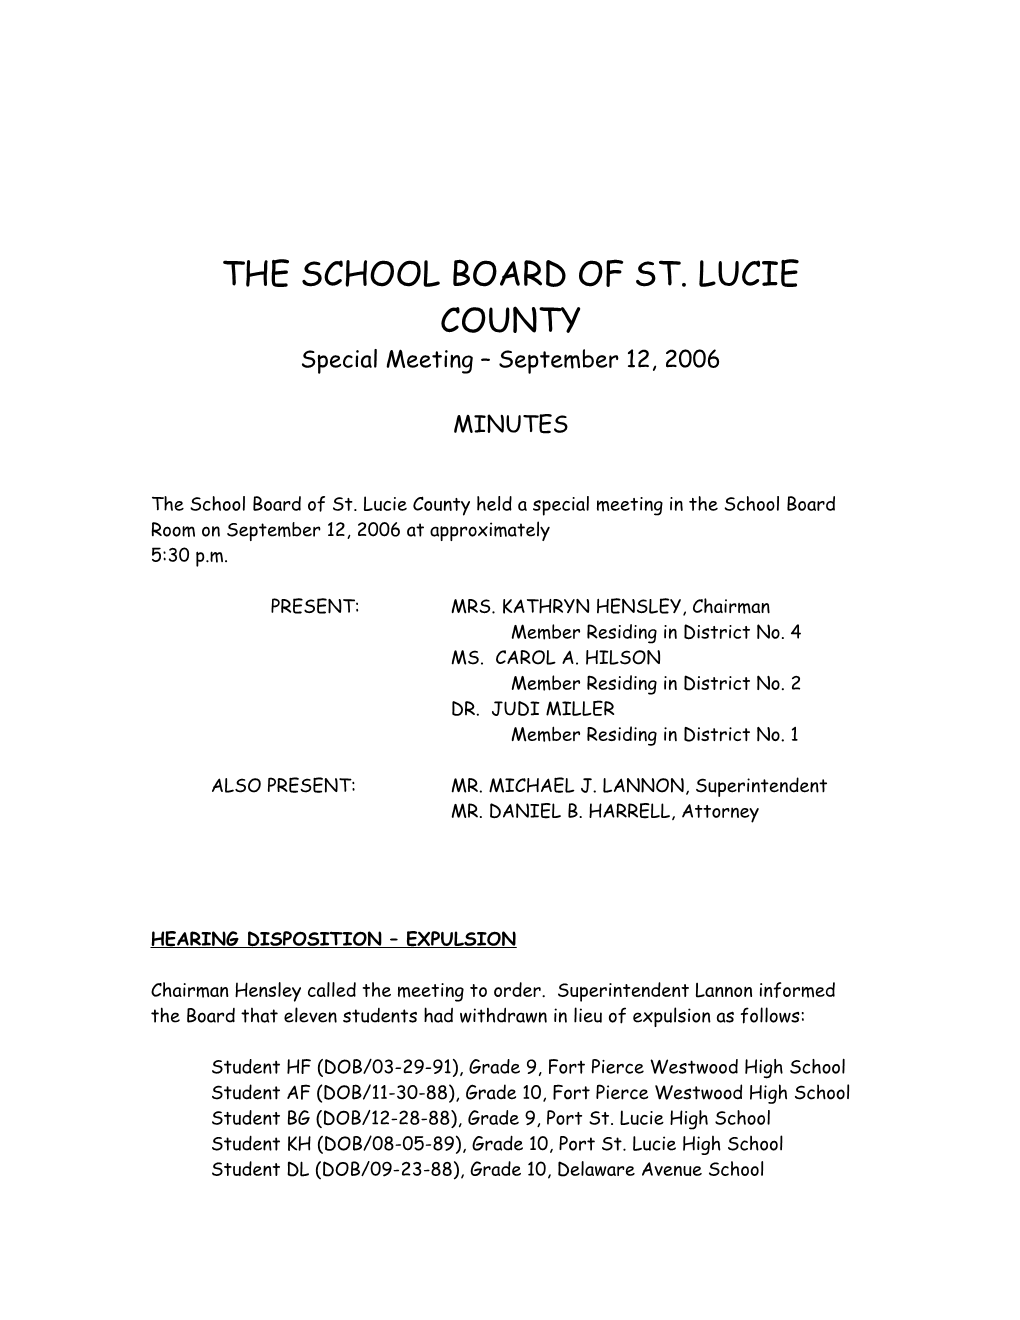 09-12-06 SLCSB Expulsion Meeting Minutes Approved 9-26-06